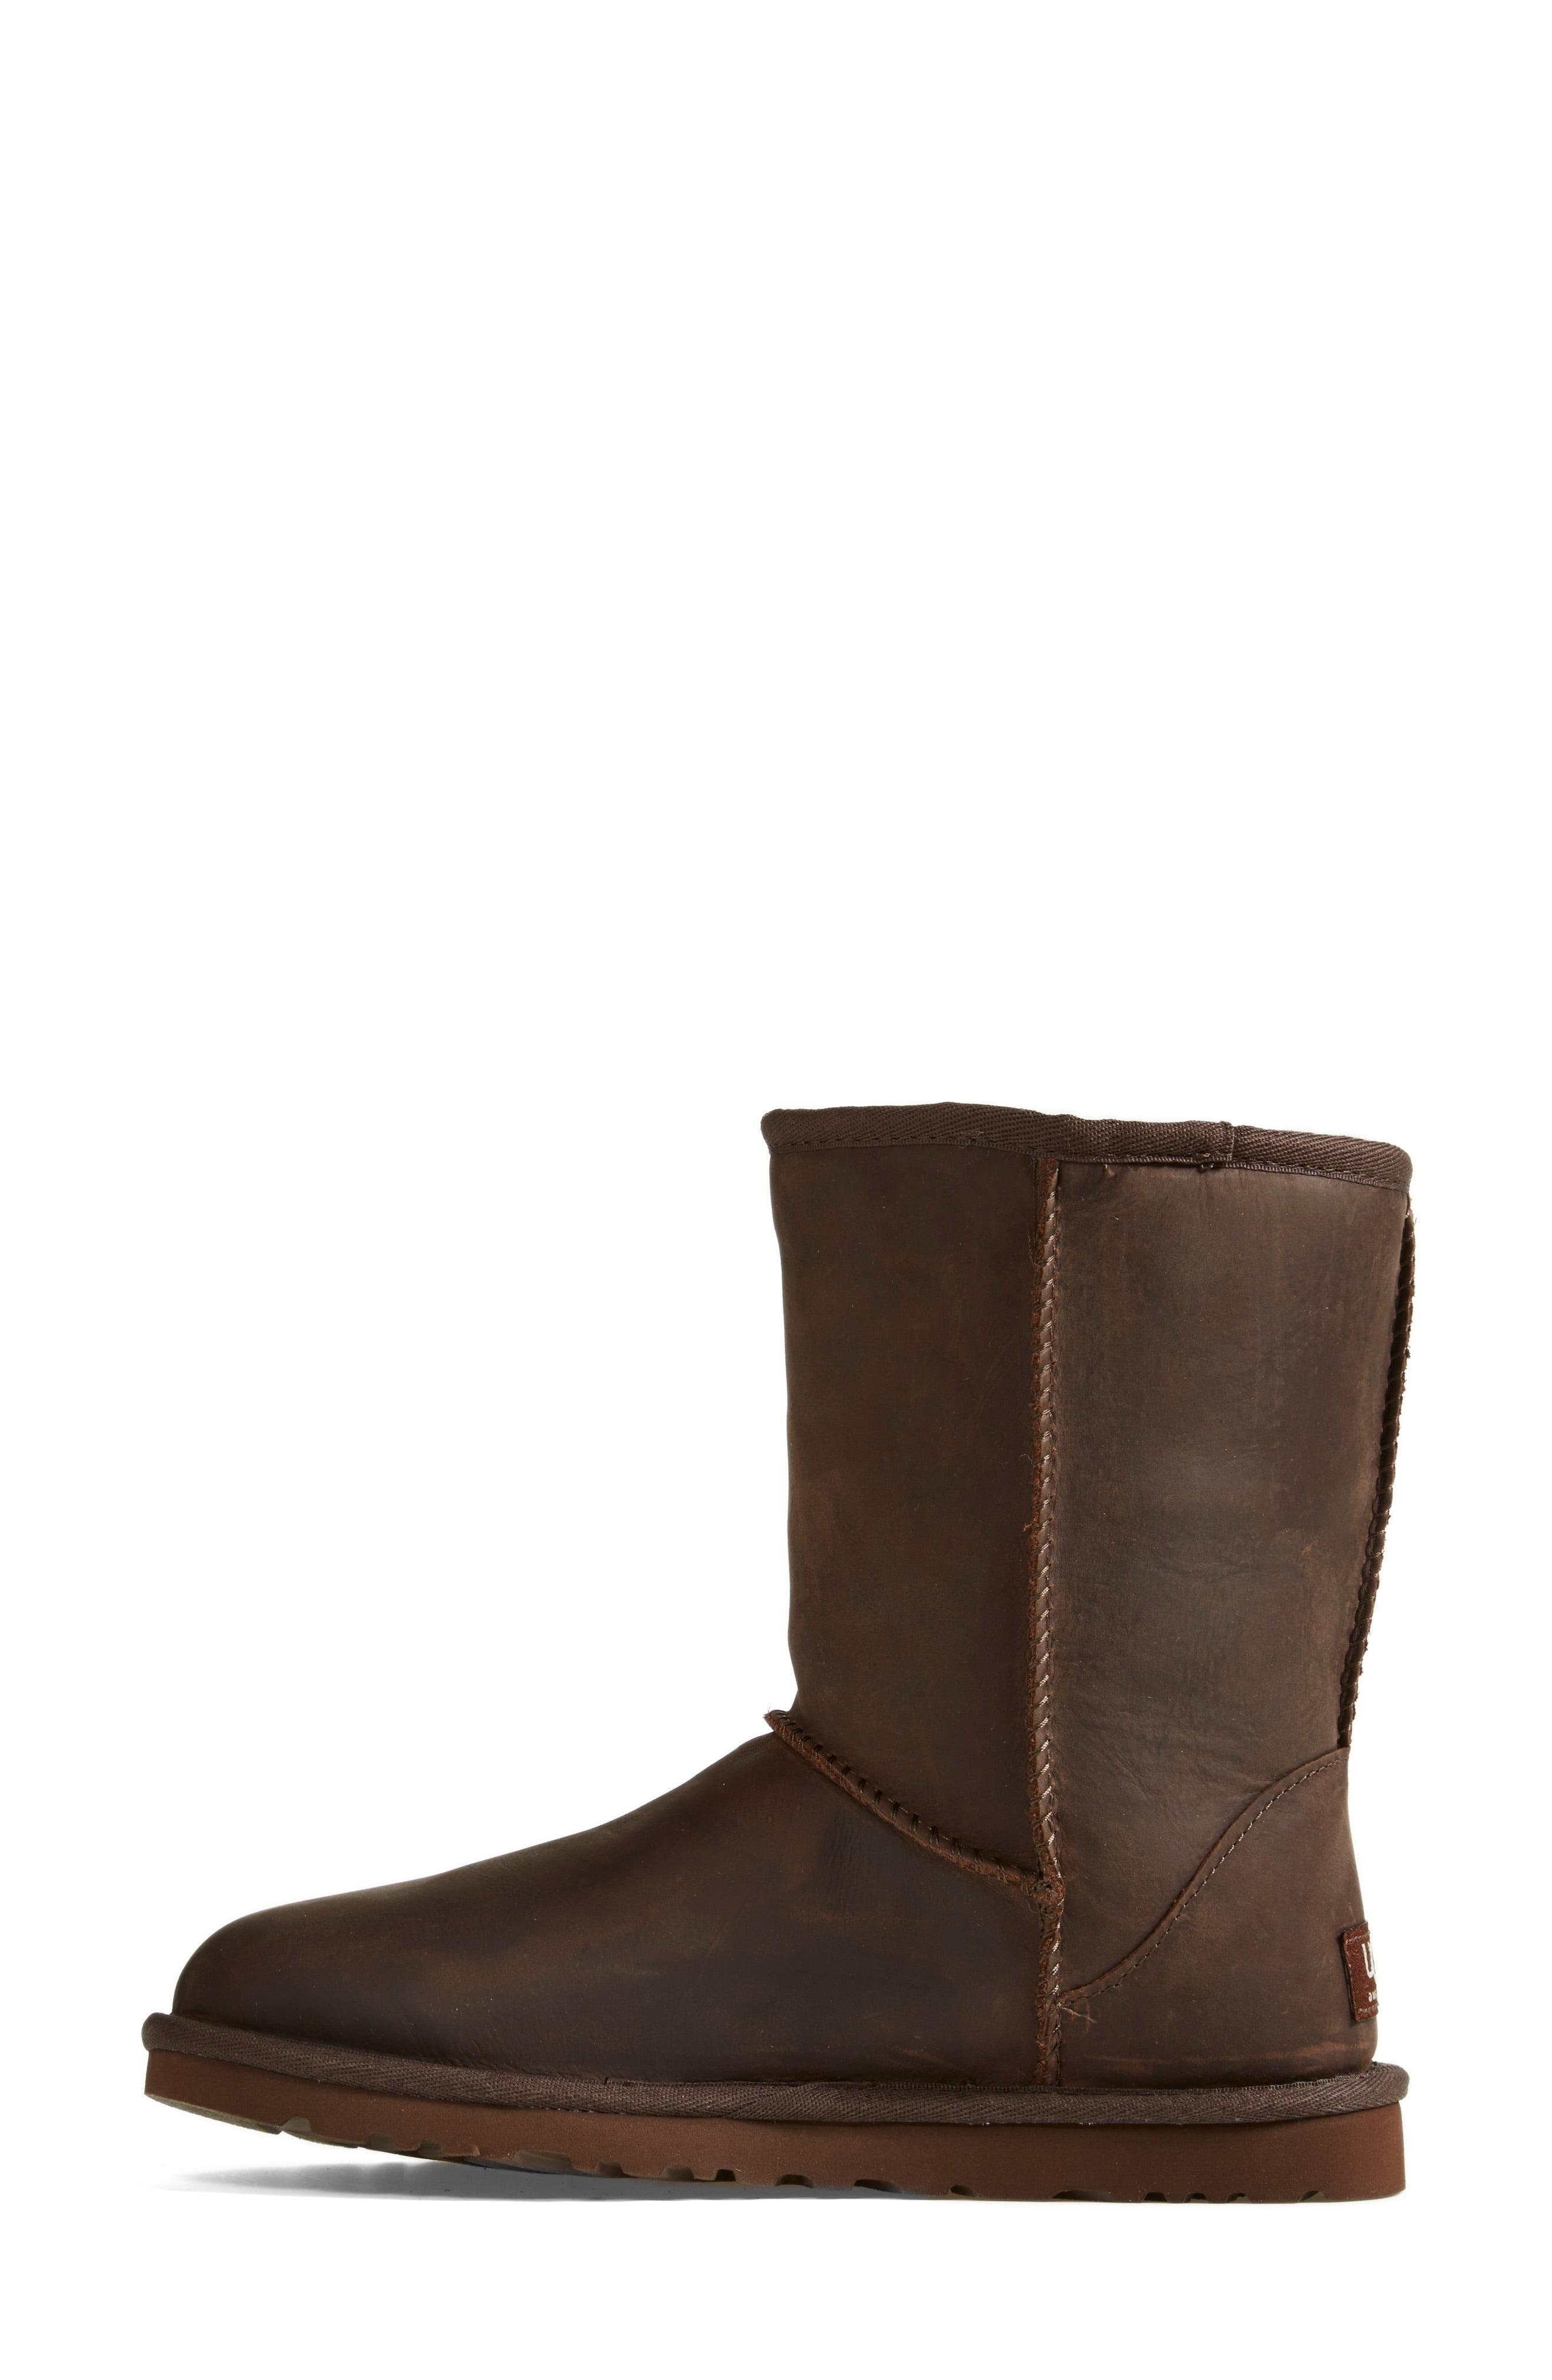 Ugg Wool Lined Boots Poland, SAVE 60% - fearthemecca.com